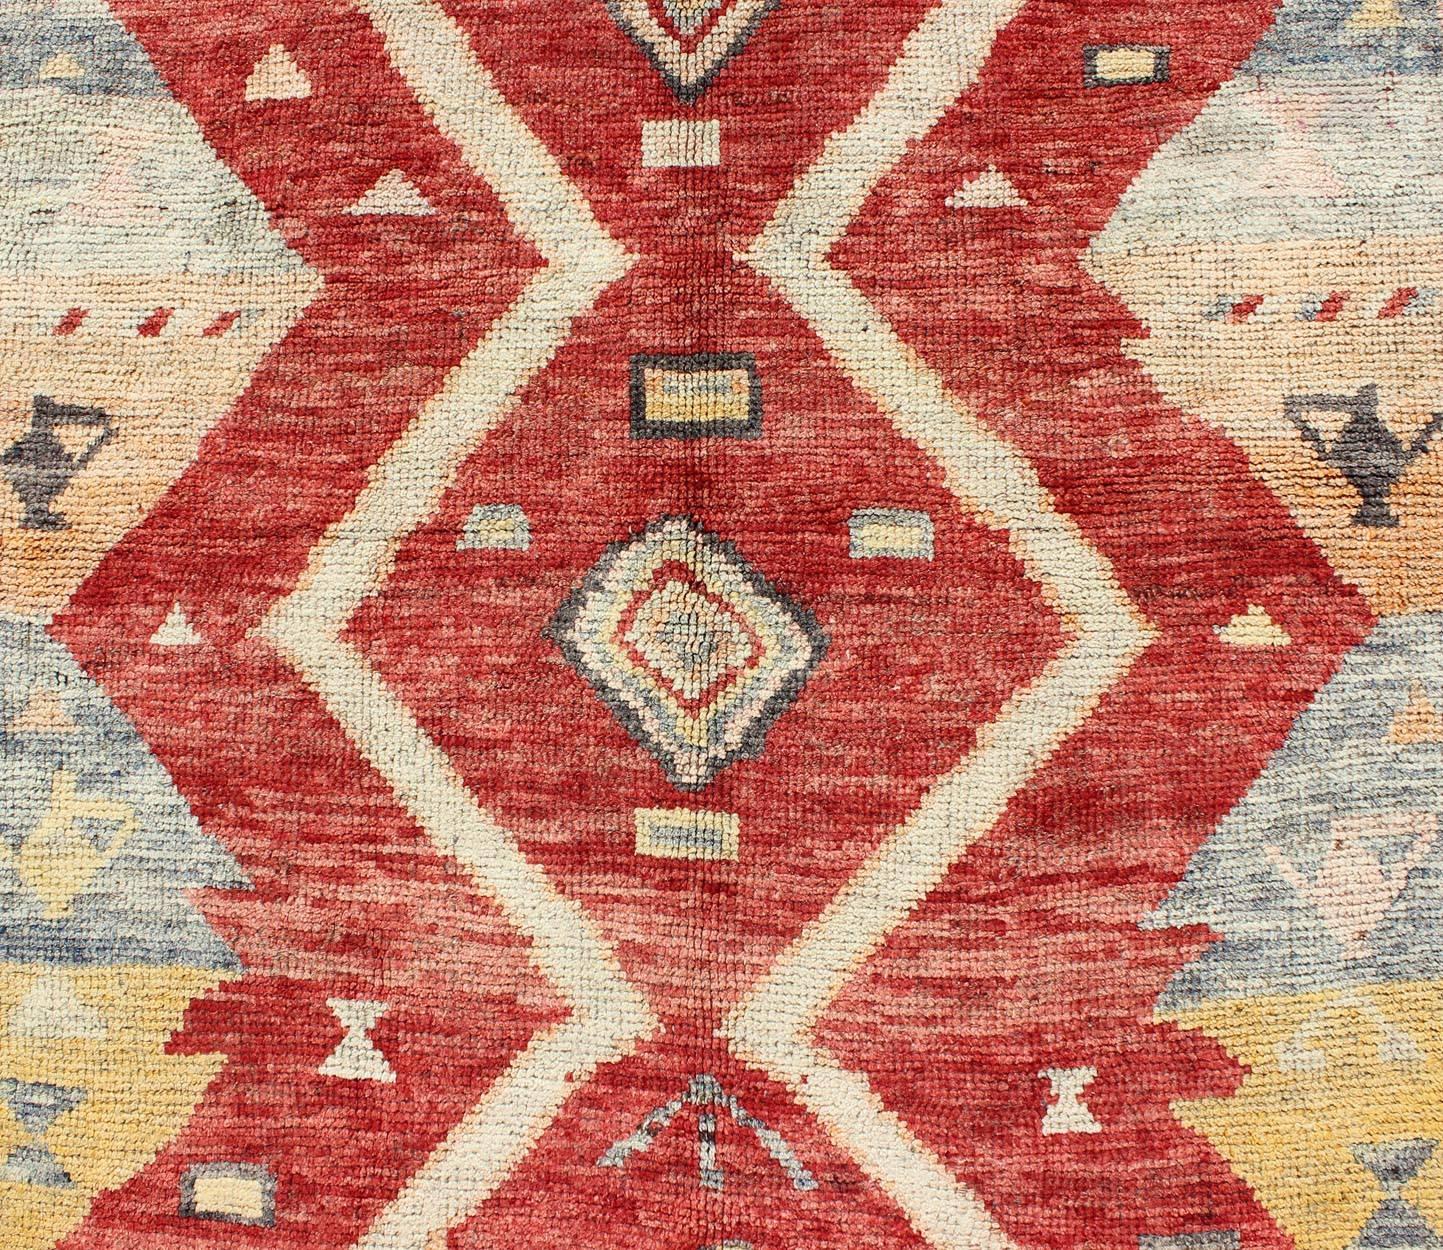 Mid-20th Century Colorful Antique Turkish Tulu Rug with Diamond Shapes Among Geometric Motifs For Sale